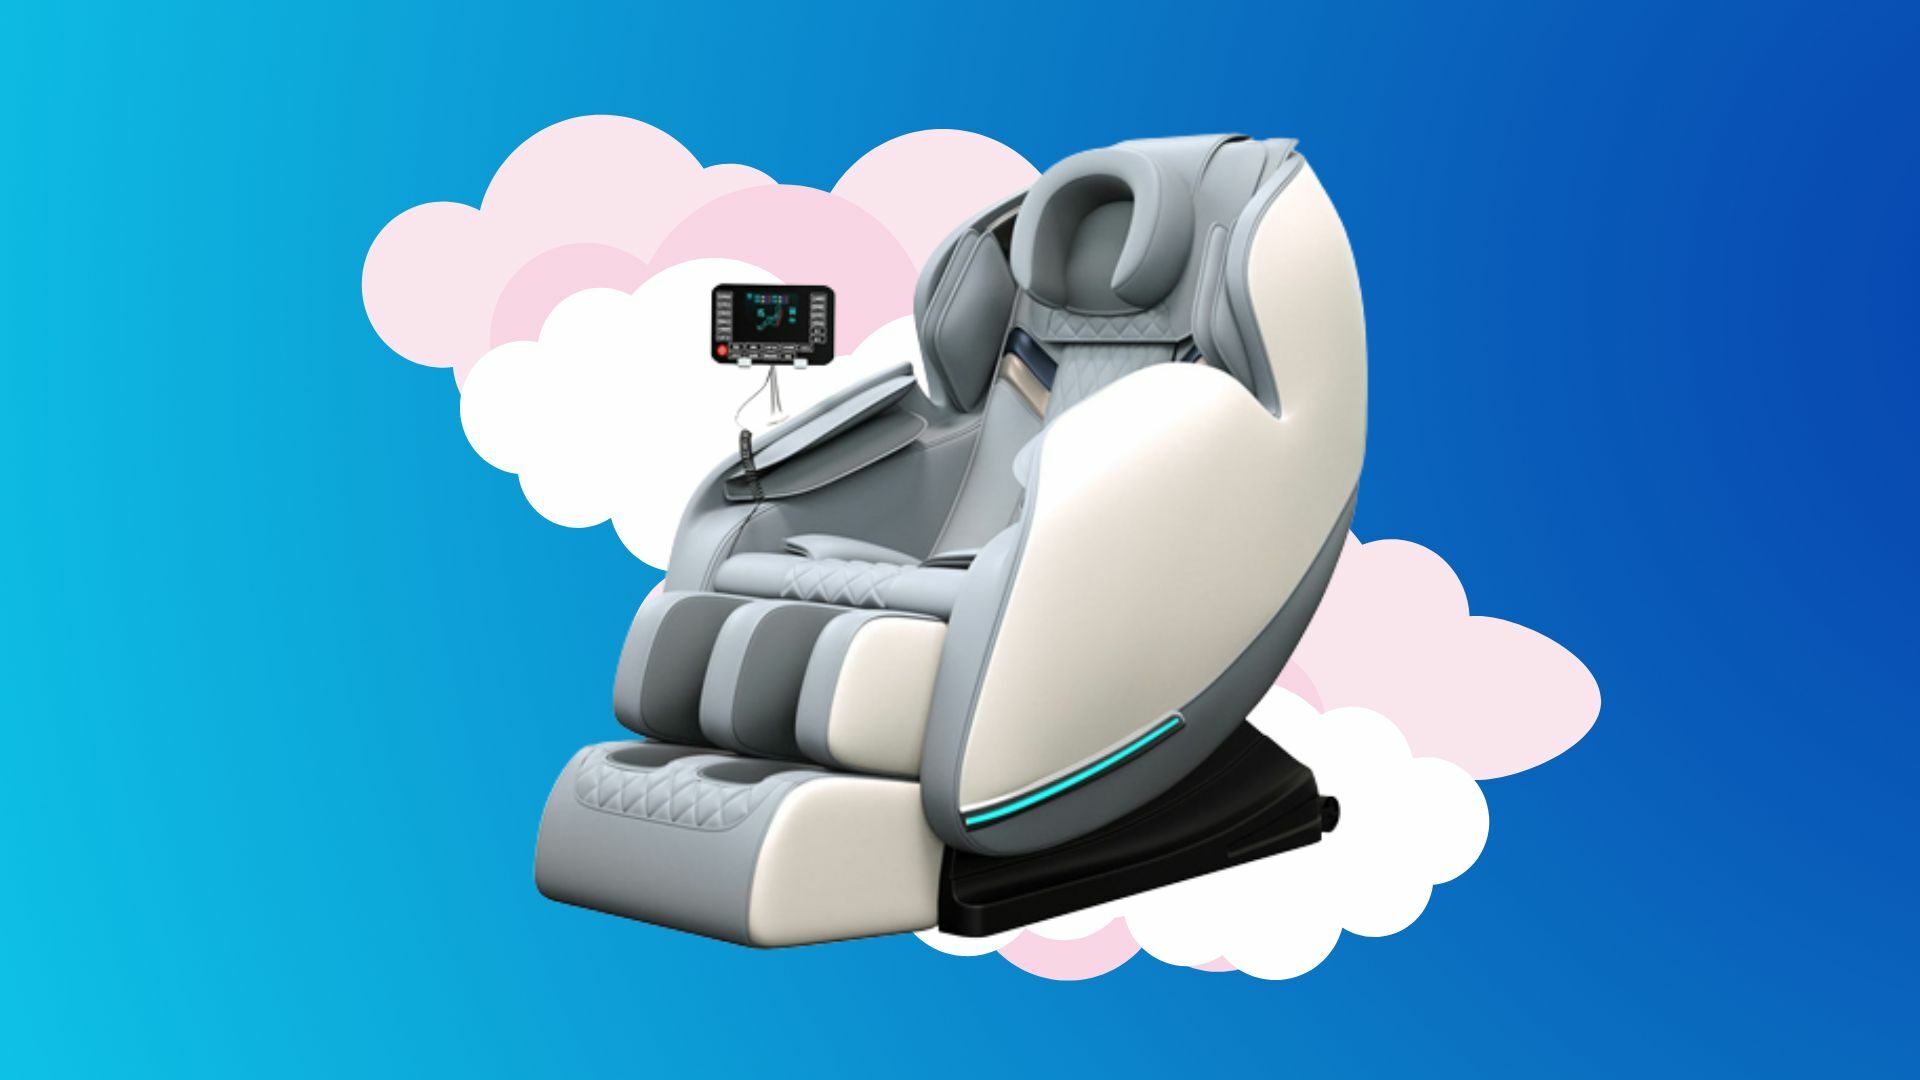 Full Body 4D Zero Gravity Home Massage Chair on a colorful background.